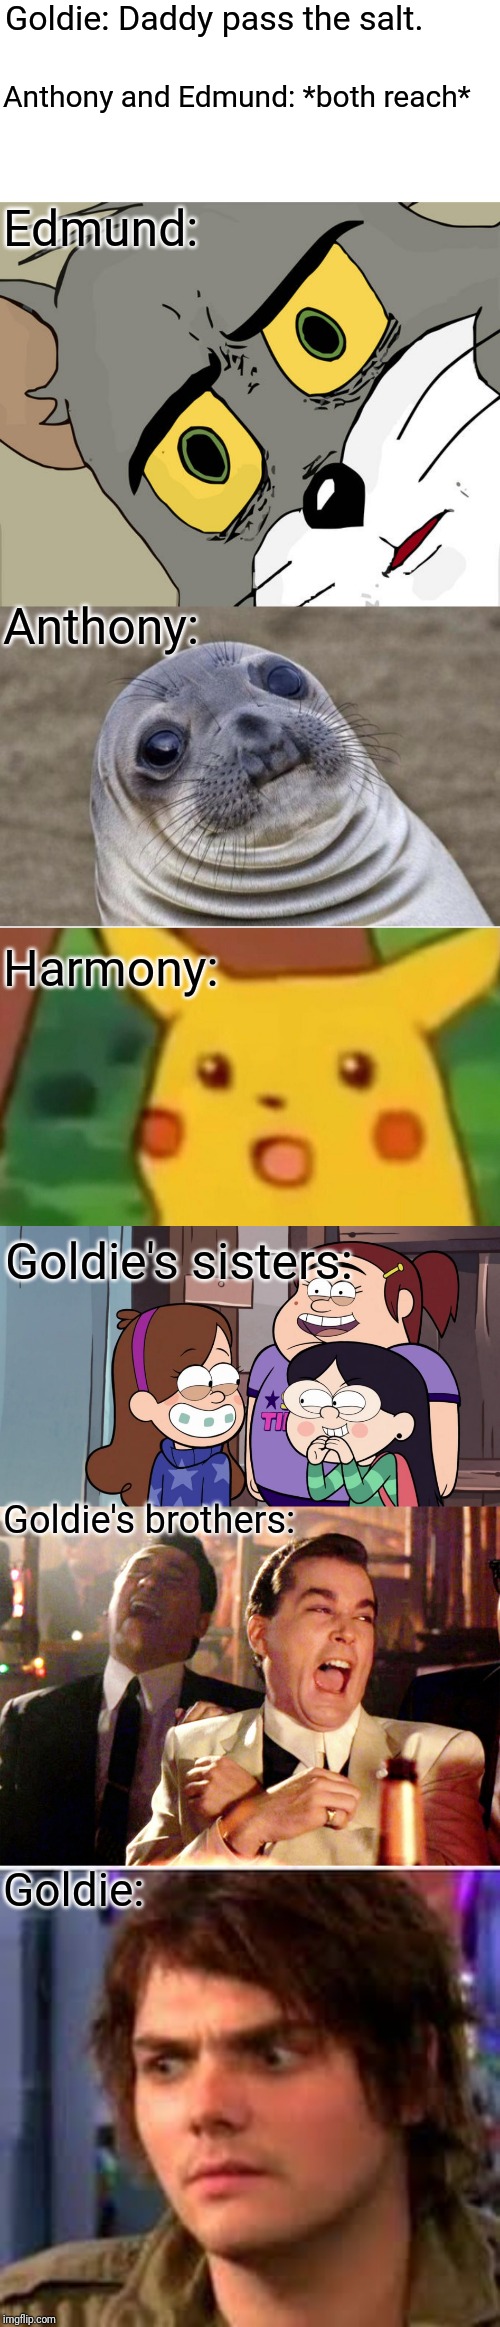 Oops. | Goldie: Daddy pass the salt. Anthony and Edmund: *both reach*; Edmund:; Anthony:; Harmony:; Goldie's sisters:; Goldie's brothers:; Goldie: | image tagged in memes,awkward moment sealion,good fellas hilarious,gravity falls giggling school girls,gerard wtf,surprised pikachu | made w/ Imgflip meme maker